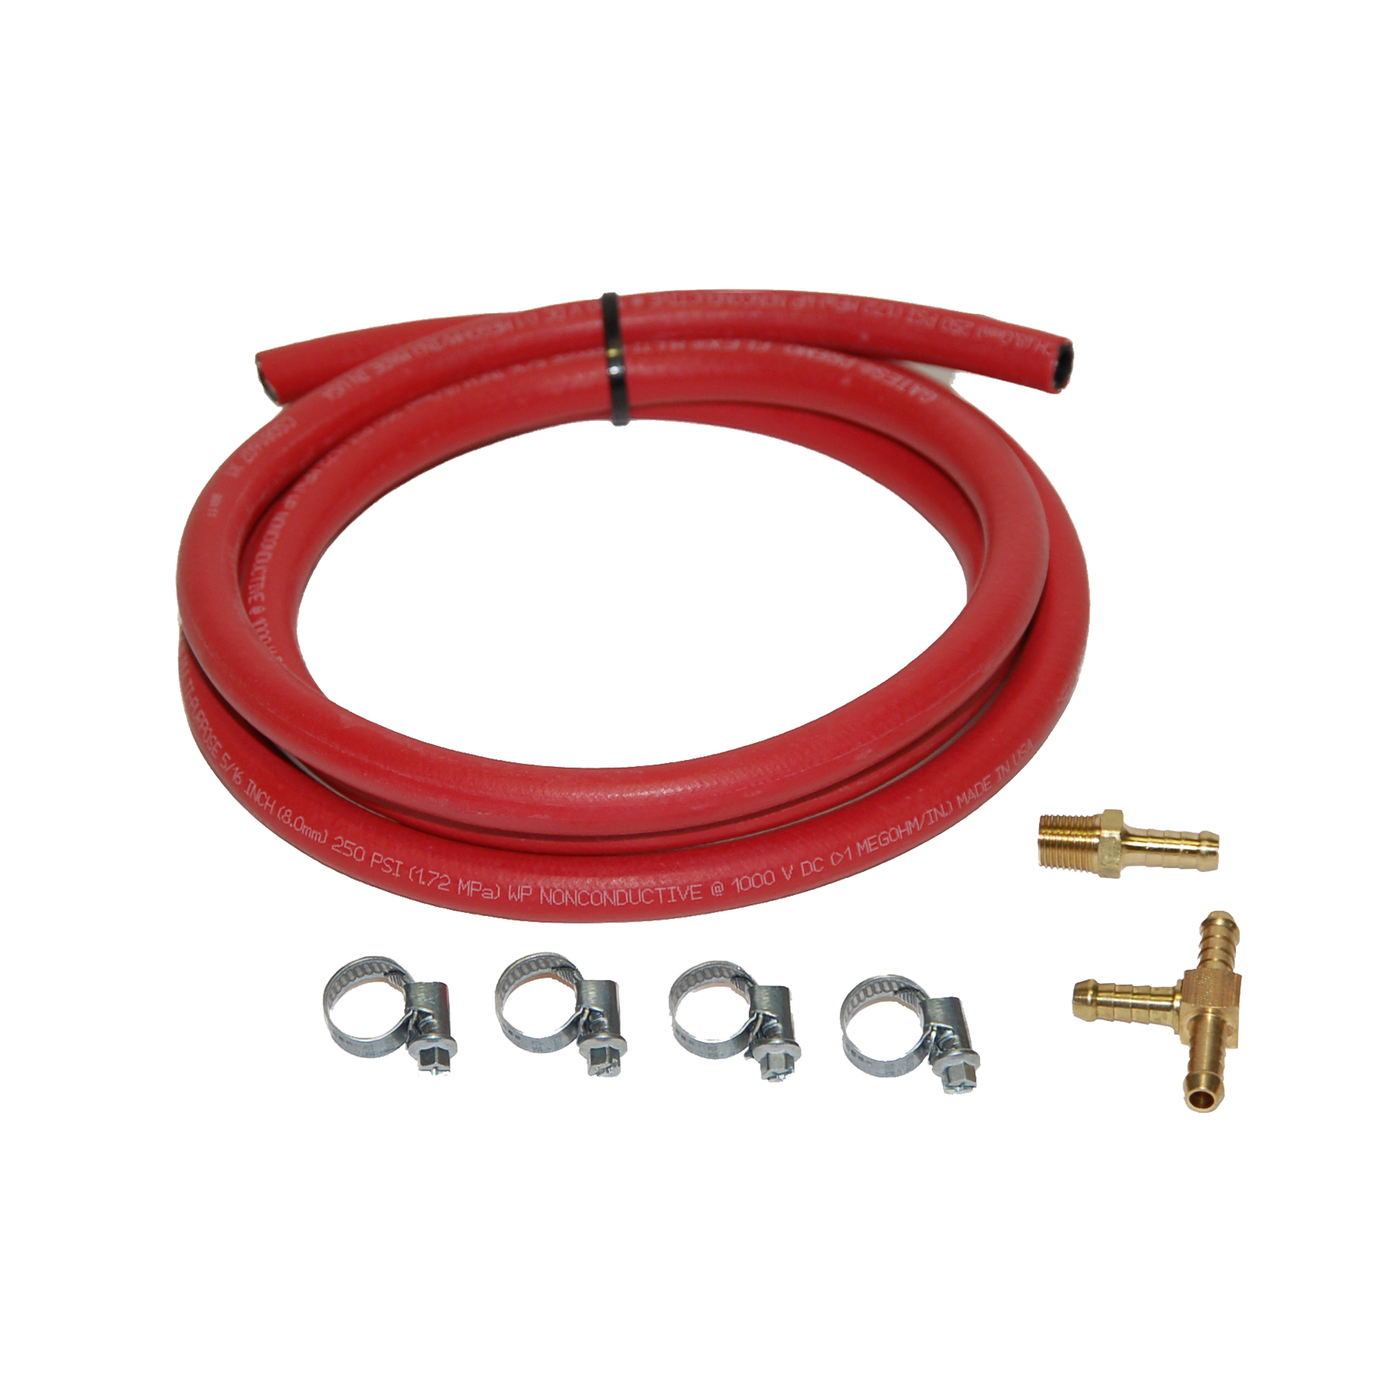 POLY DIESEL TANK VENT EXTENSION KIT WITH HOSE & FITTINGS